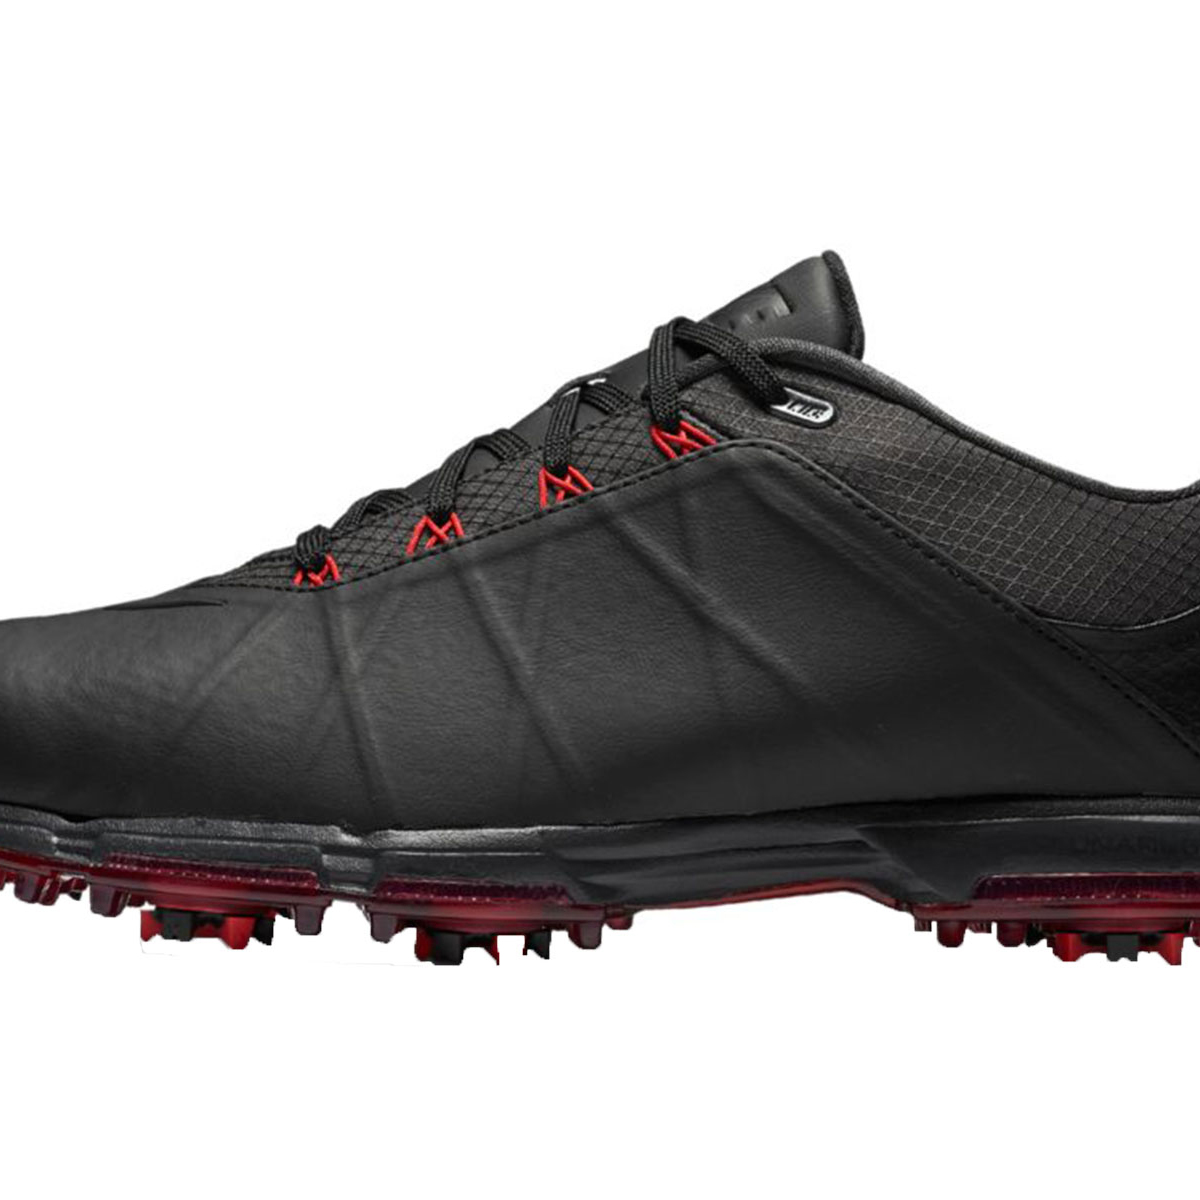 Nike Golf Lunar Fire Shoes from 